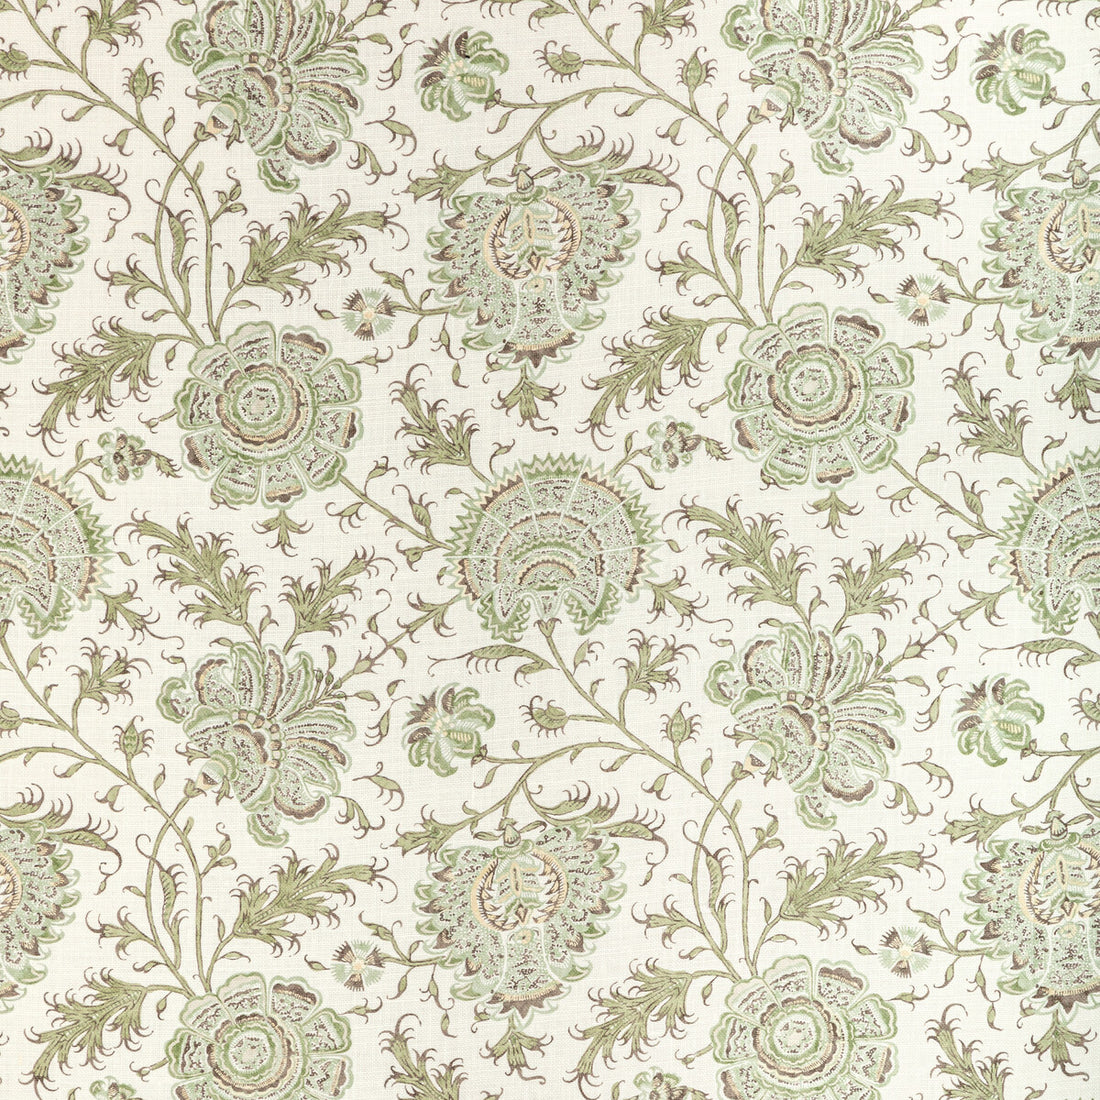 Indiennes Floral fabric in ivy color - pattern 2022108.316.0 - by Lee Jofa in the Sarah Bartholomew collection